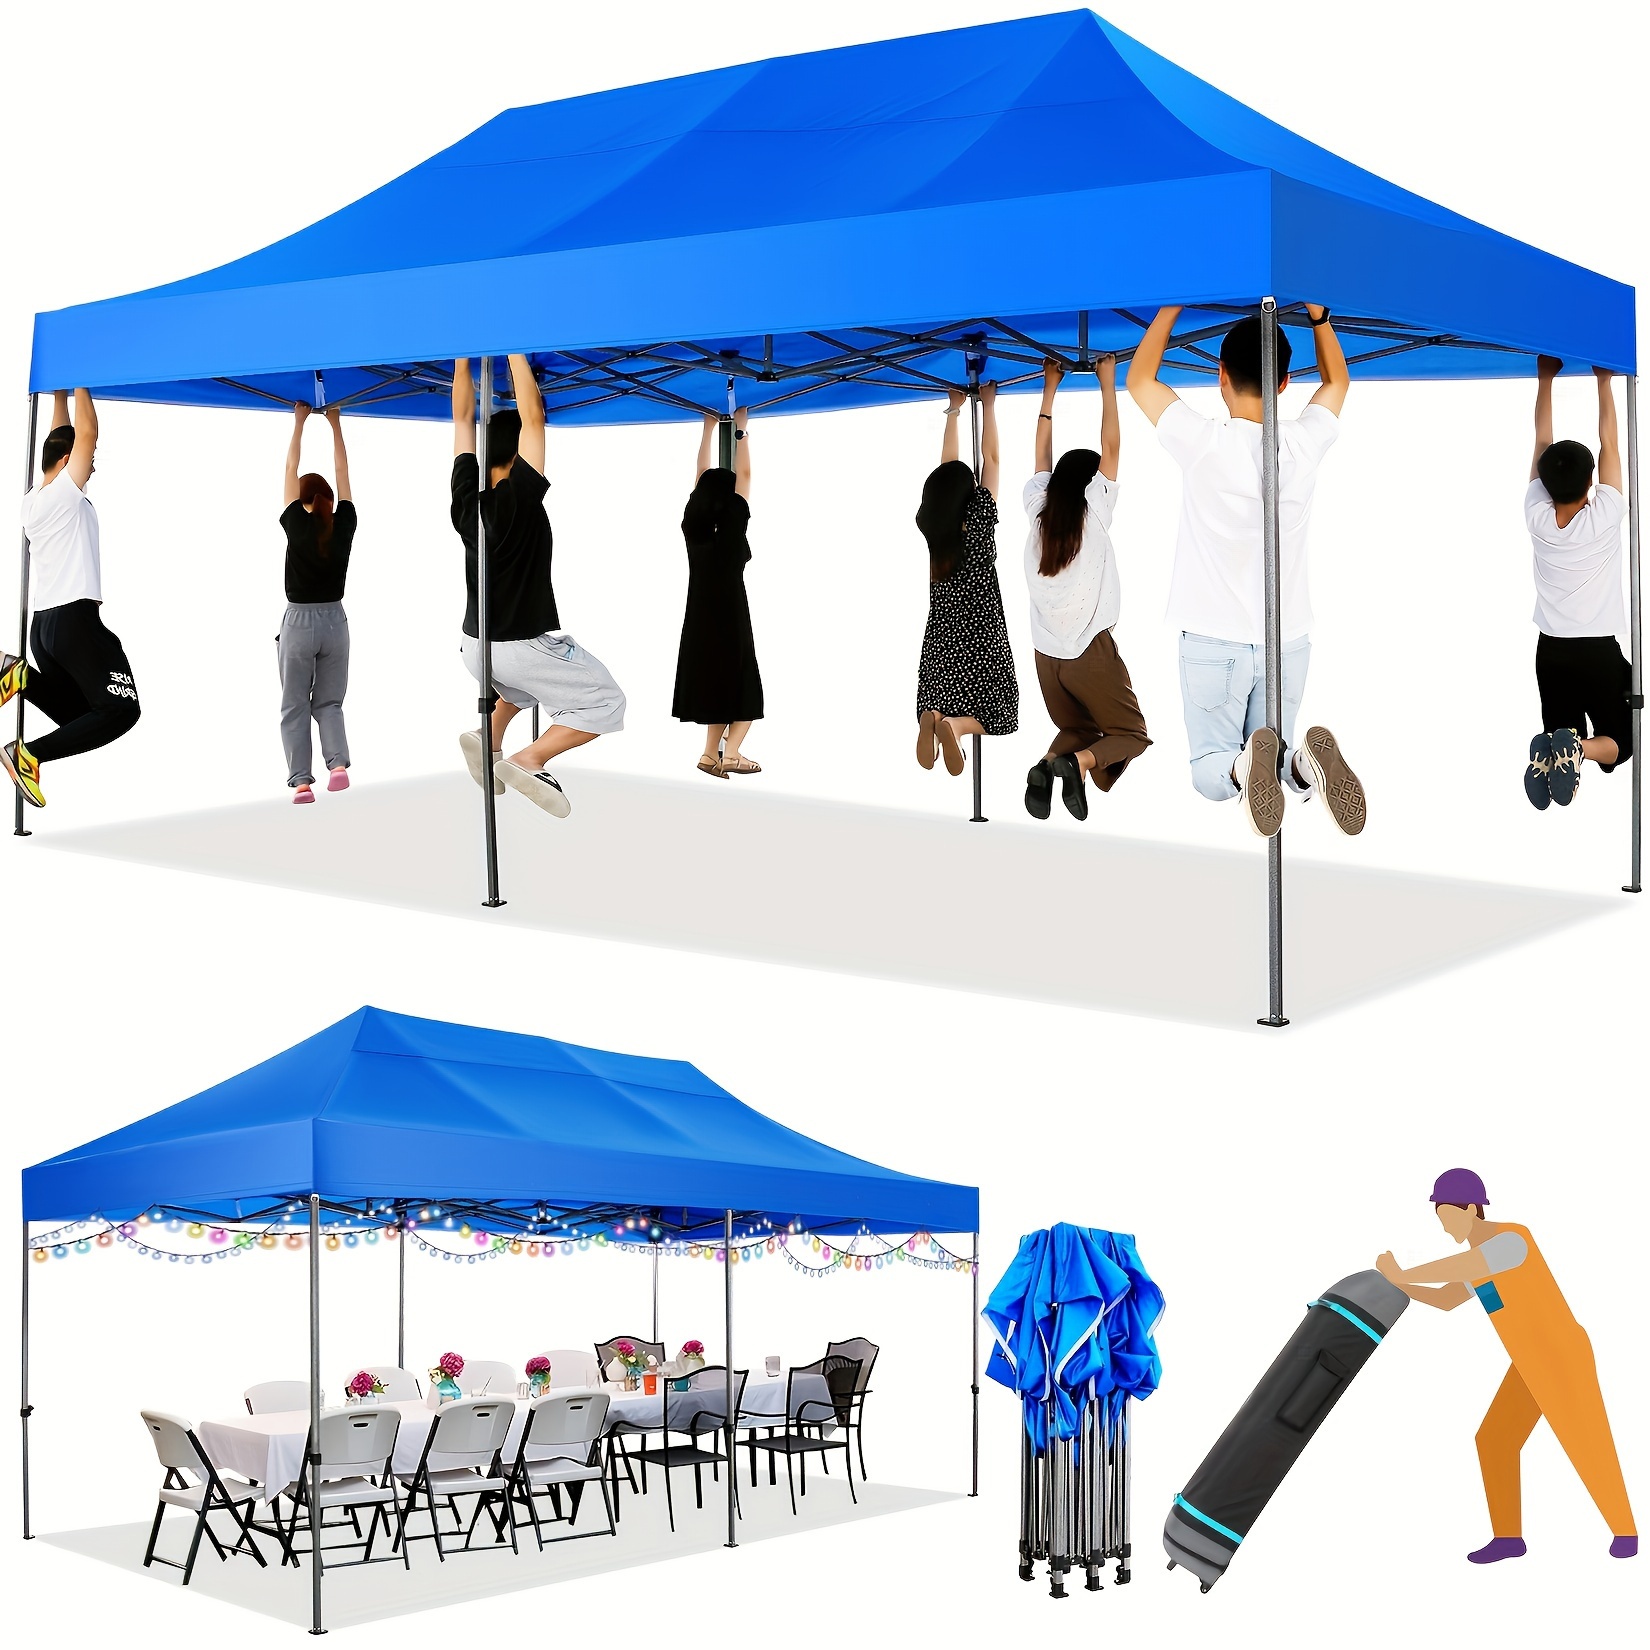 

Hoteel 10x20ft Heavy Duty Pop Up Canopy Tent Wind & Waterproof Commercial Outdoor Canopy Wedding Party Tents For Parties All Season